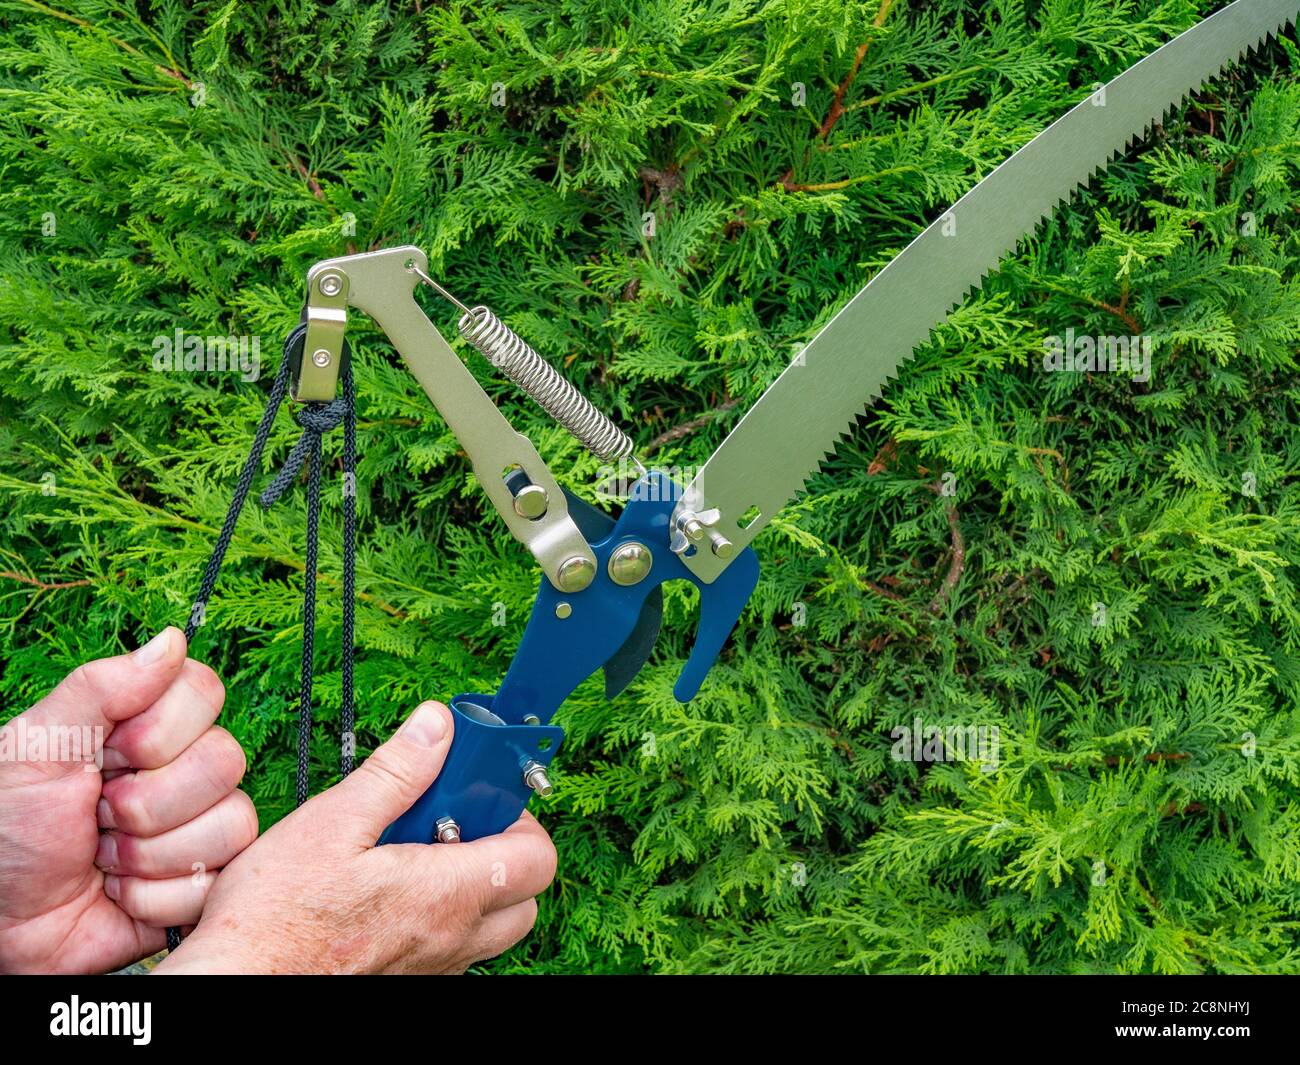 Closeup of a man's hands holding a pole pruner with saw attachment, while pulling a cord to activate the pruning blade, next to a conifer tree. Stock Photo